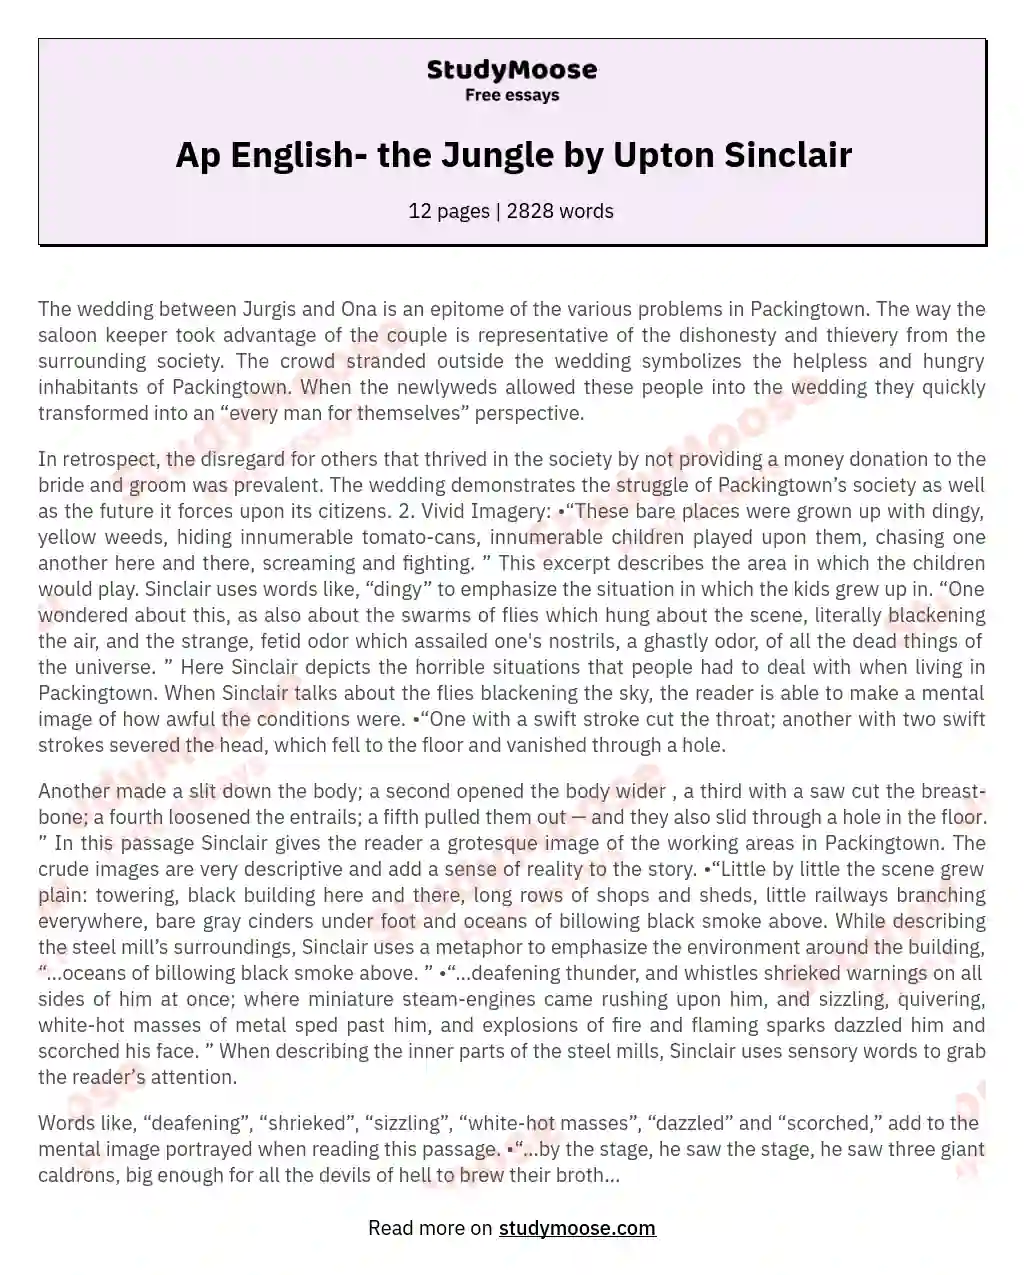 Ap English- the Jungle by Upton Sinclair essay